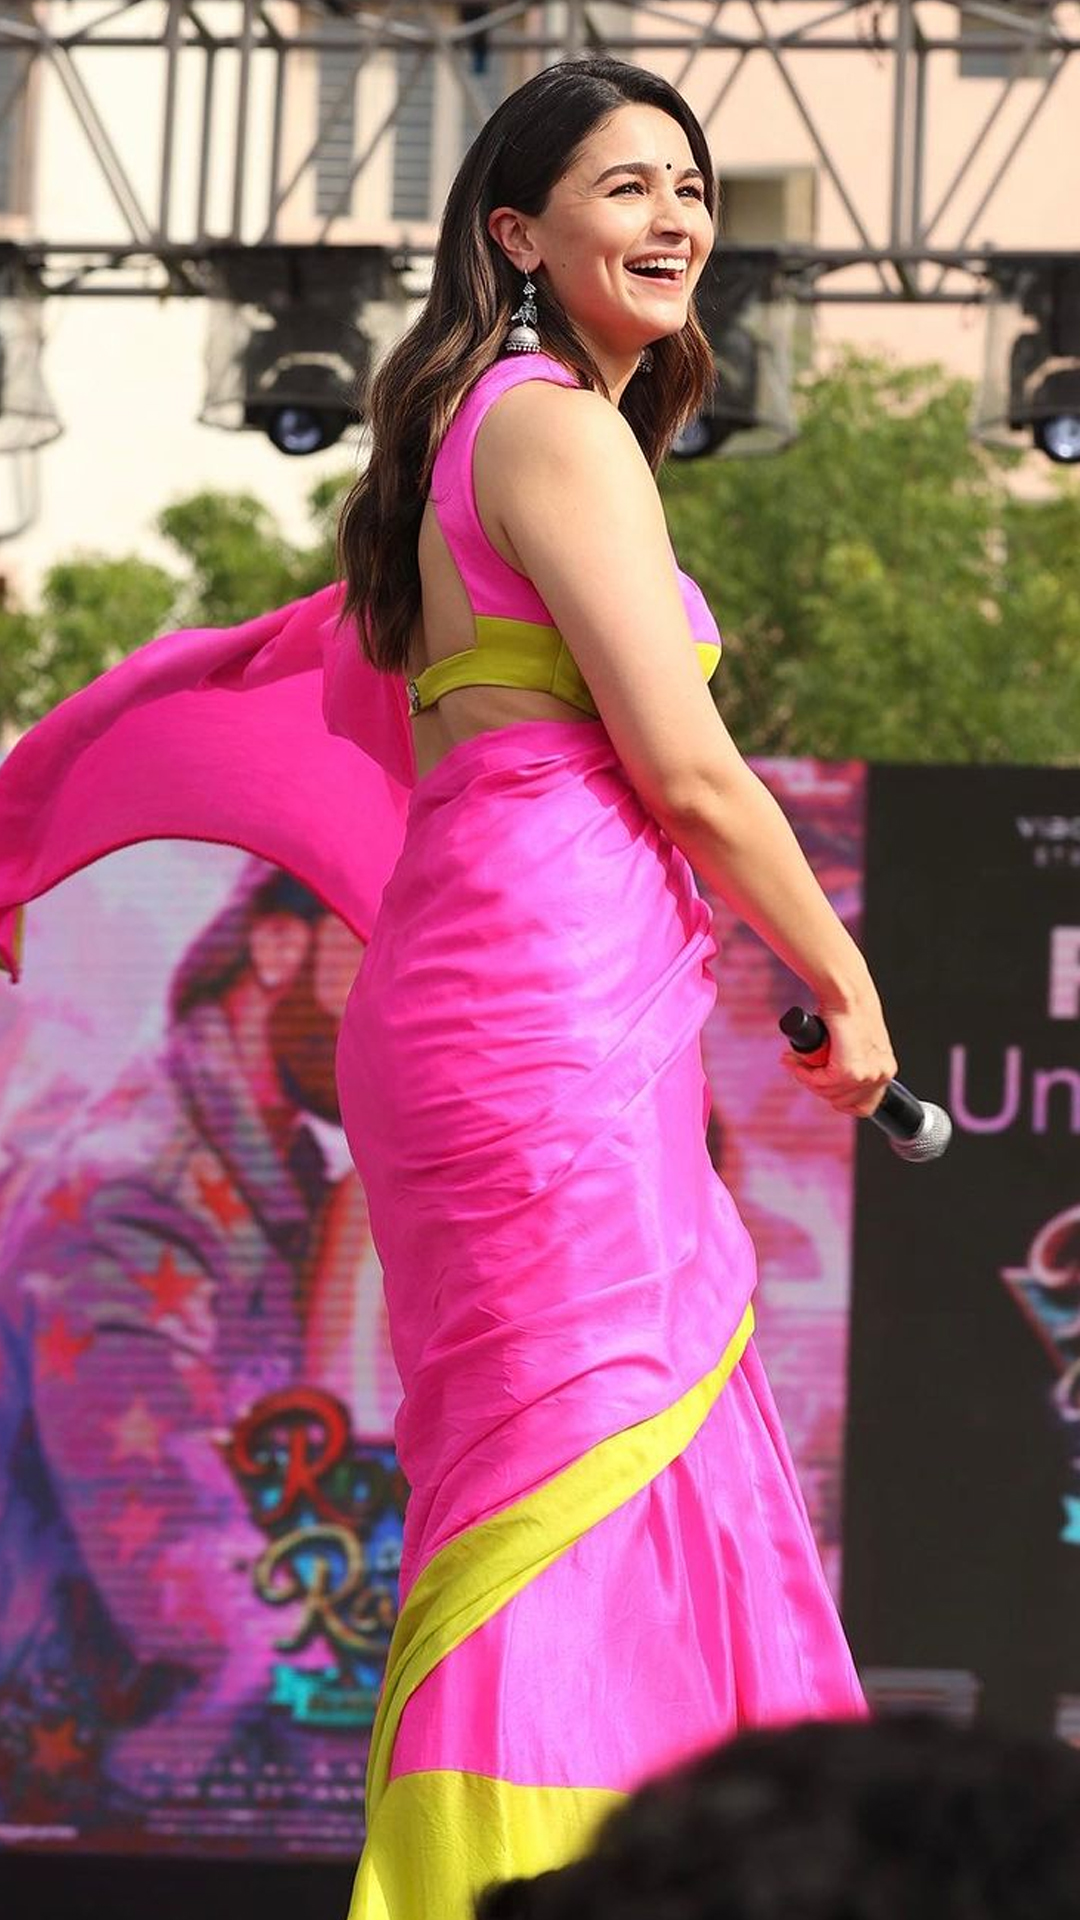 Alia Bhatt takes over the stage wearing a pink dress